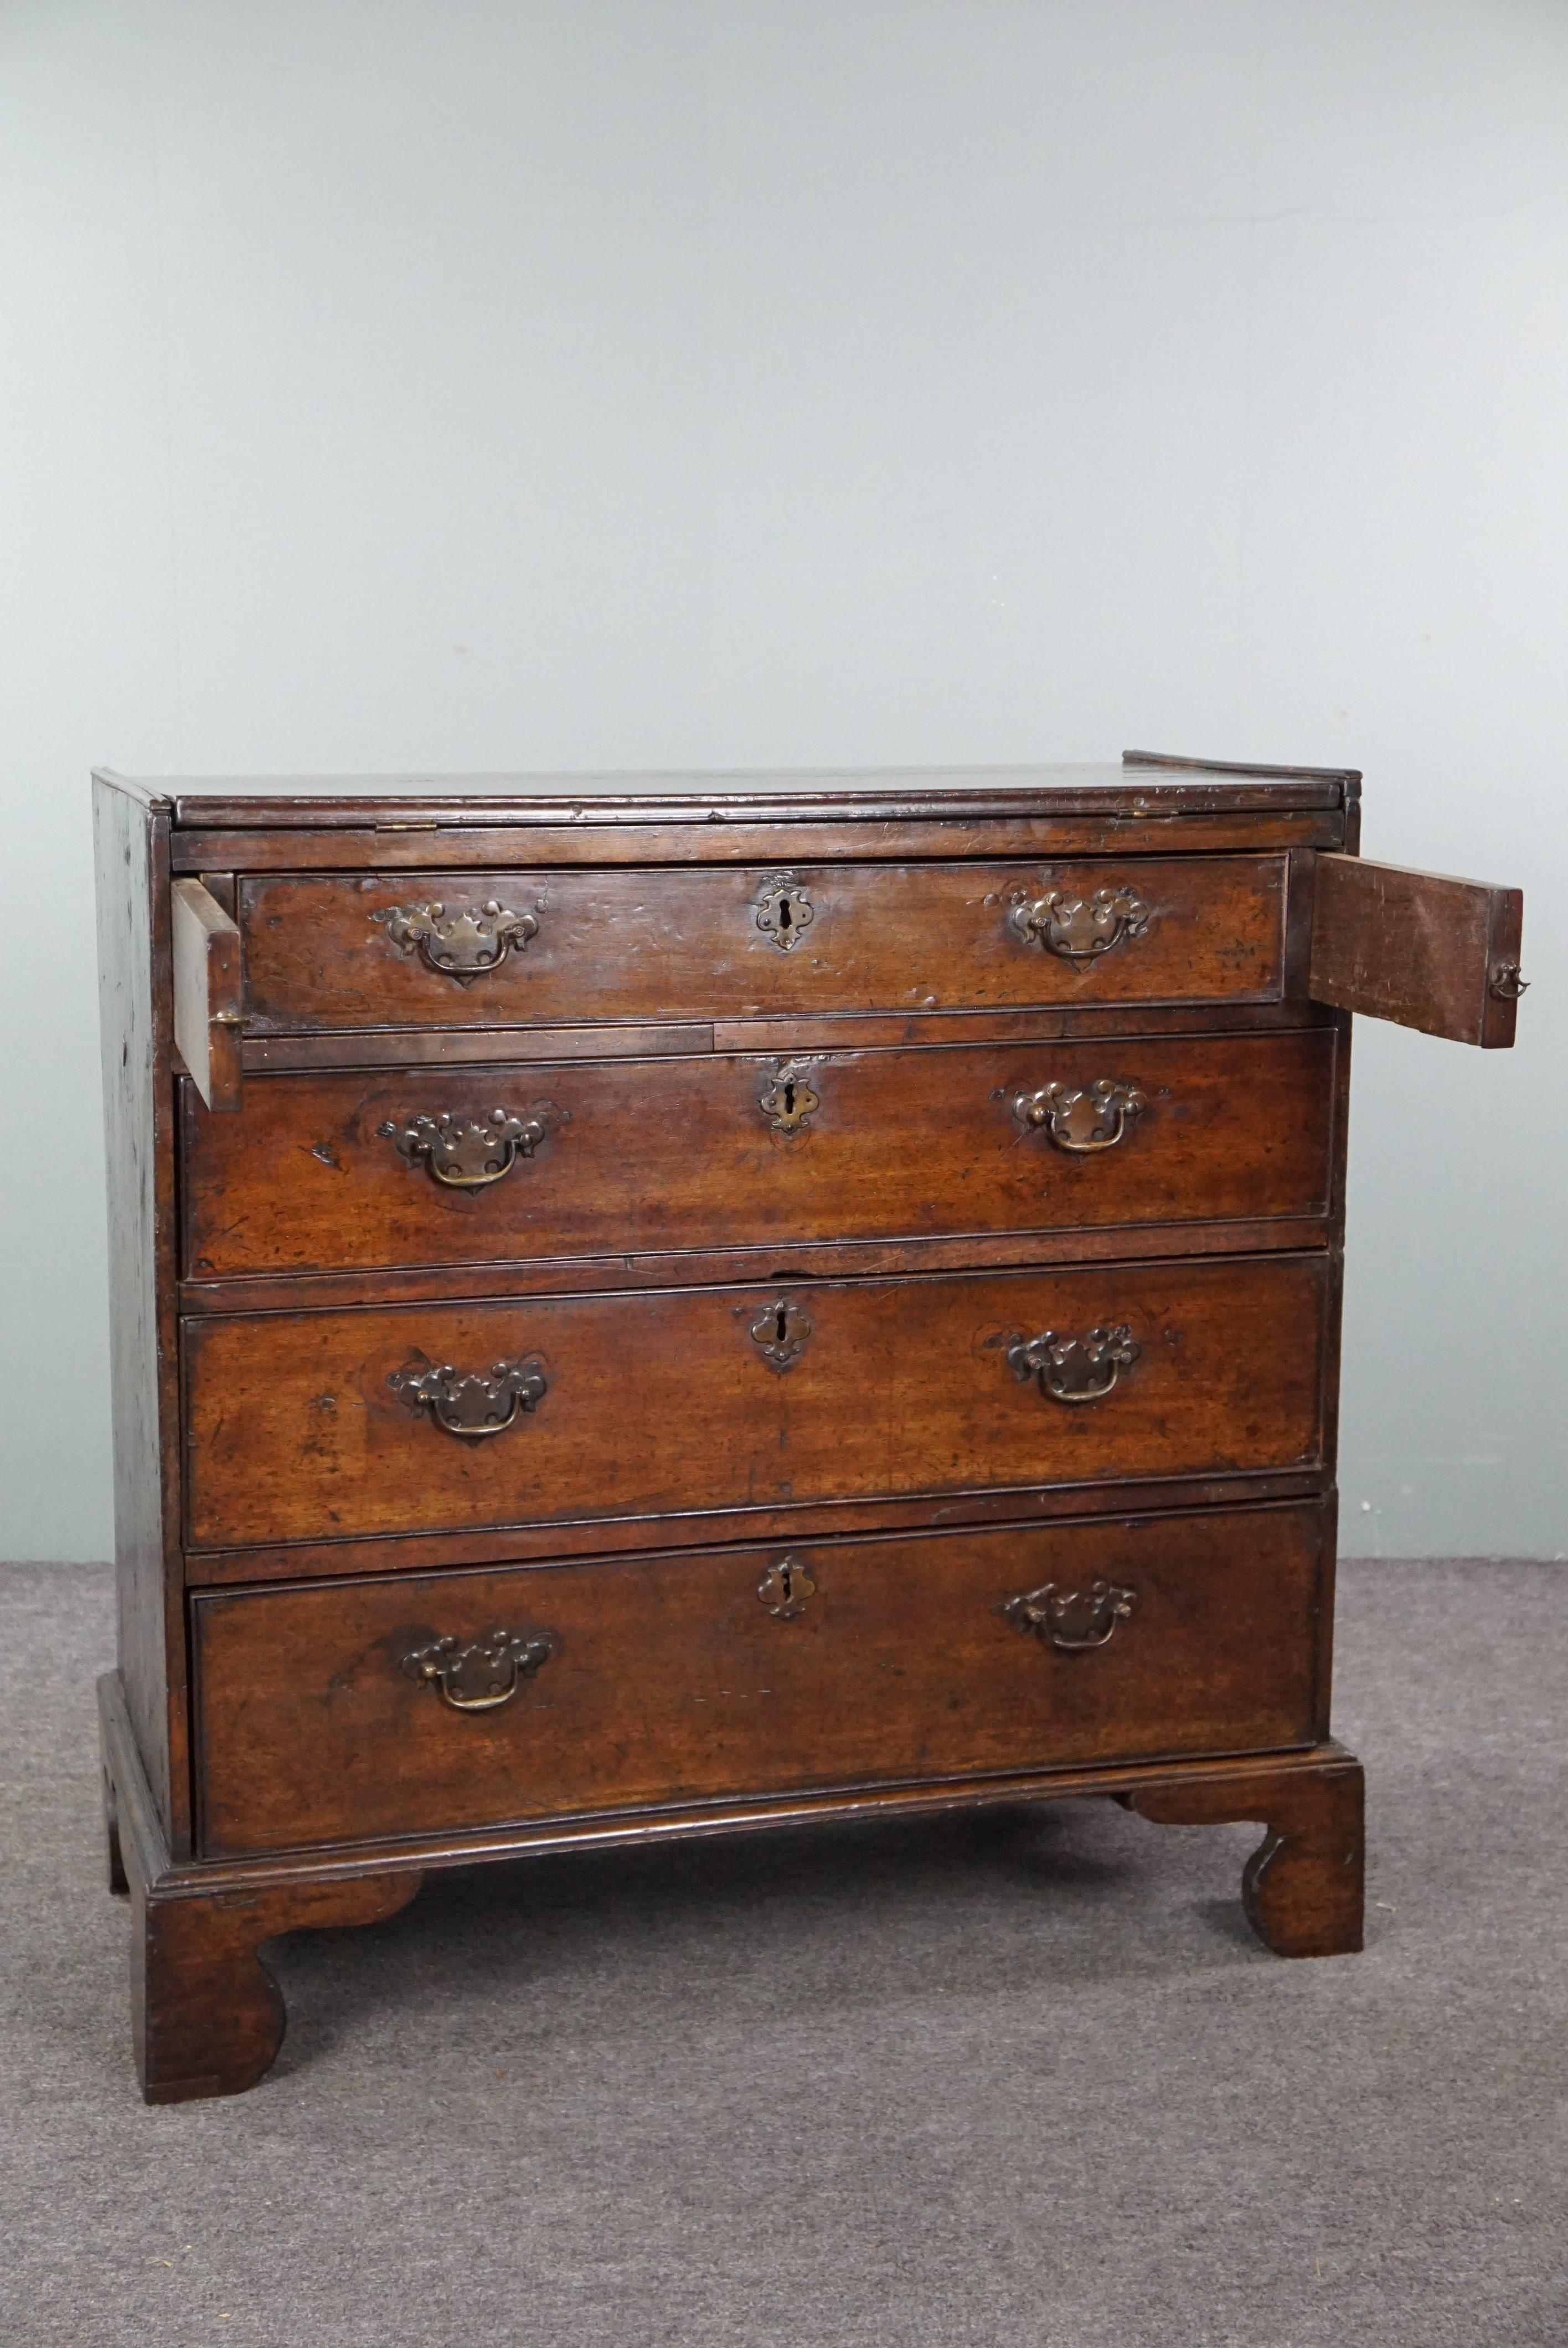 Offered is this beautiful antique English oak Bachelor Chest with graceful details. What makes this chest of drawers so special is not just its aesthetics but also its versatility. Whether it stands in a study, bedroom, or living room, the Bachelor